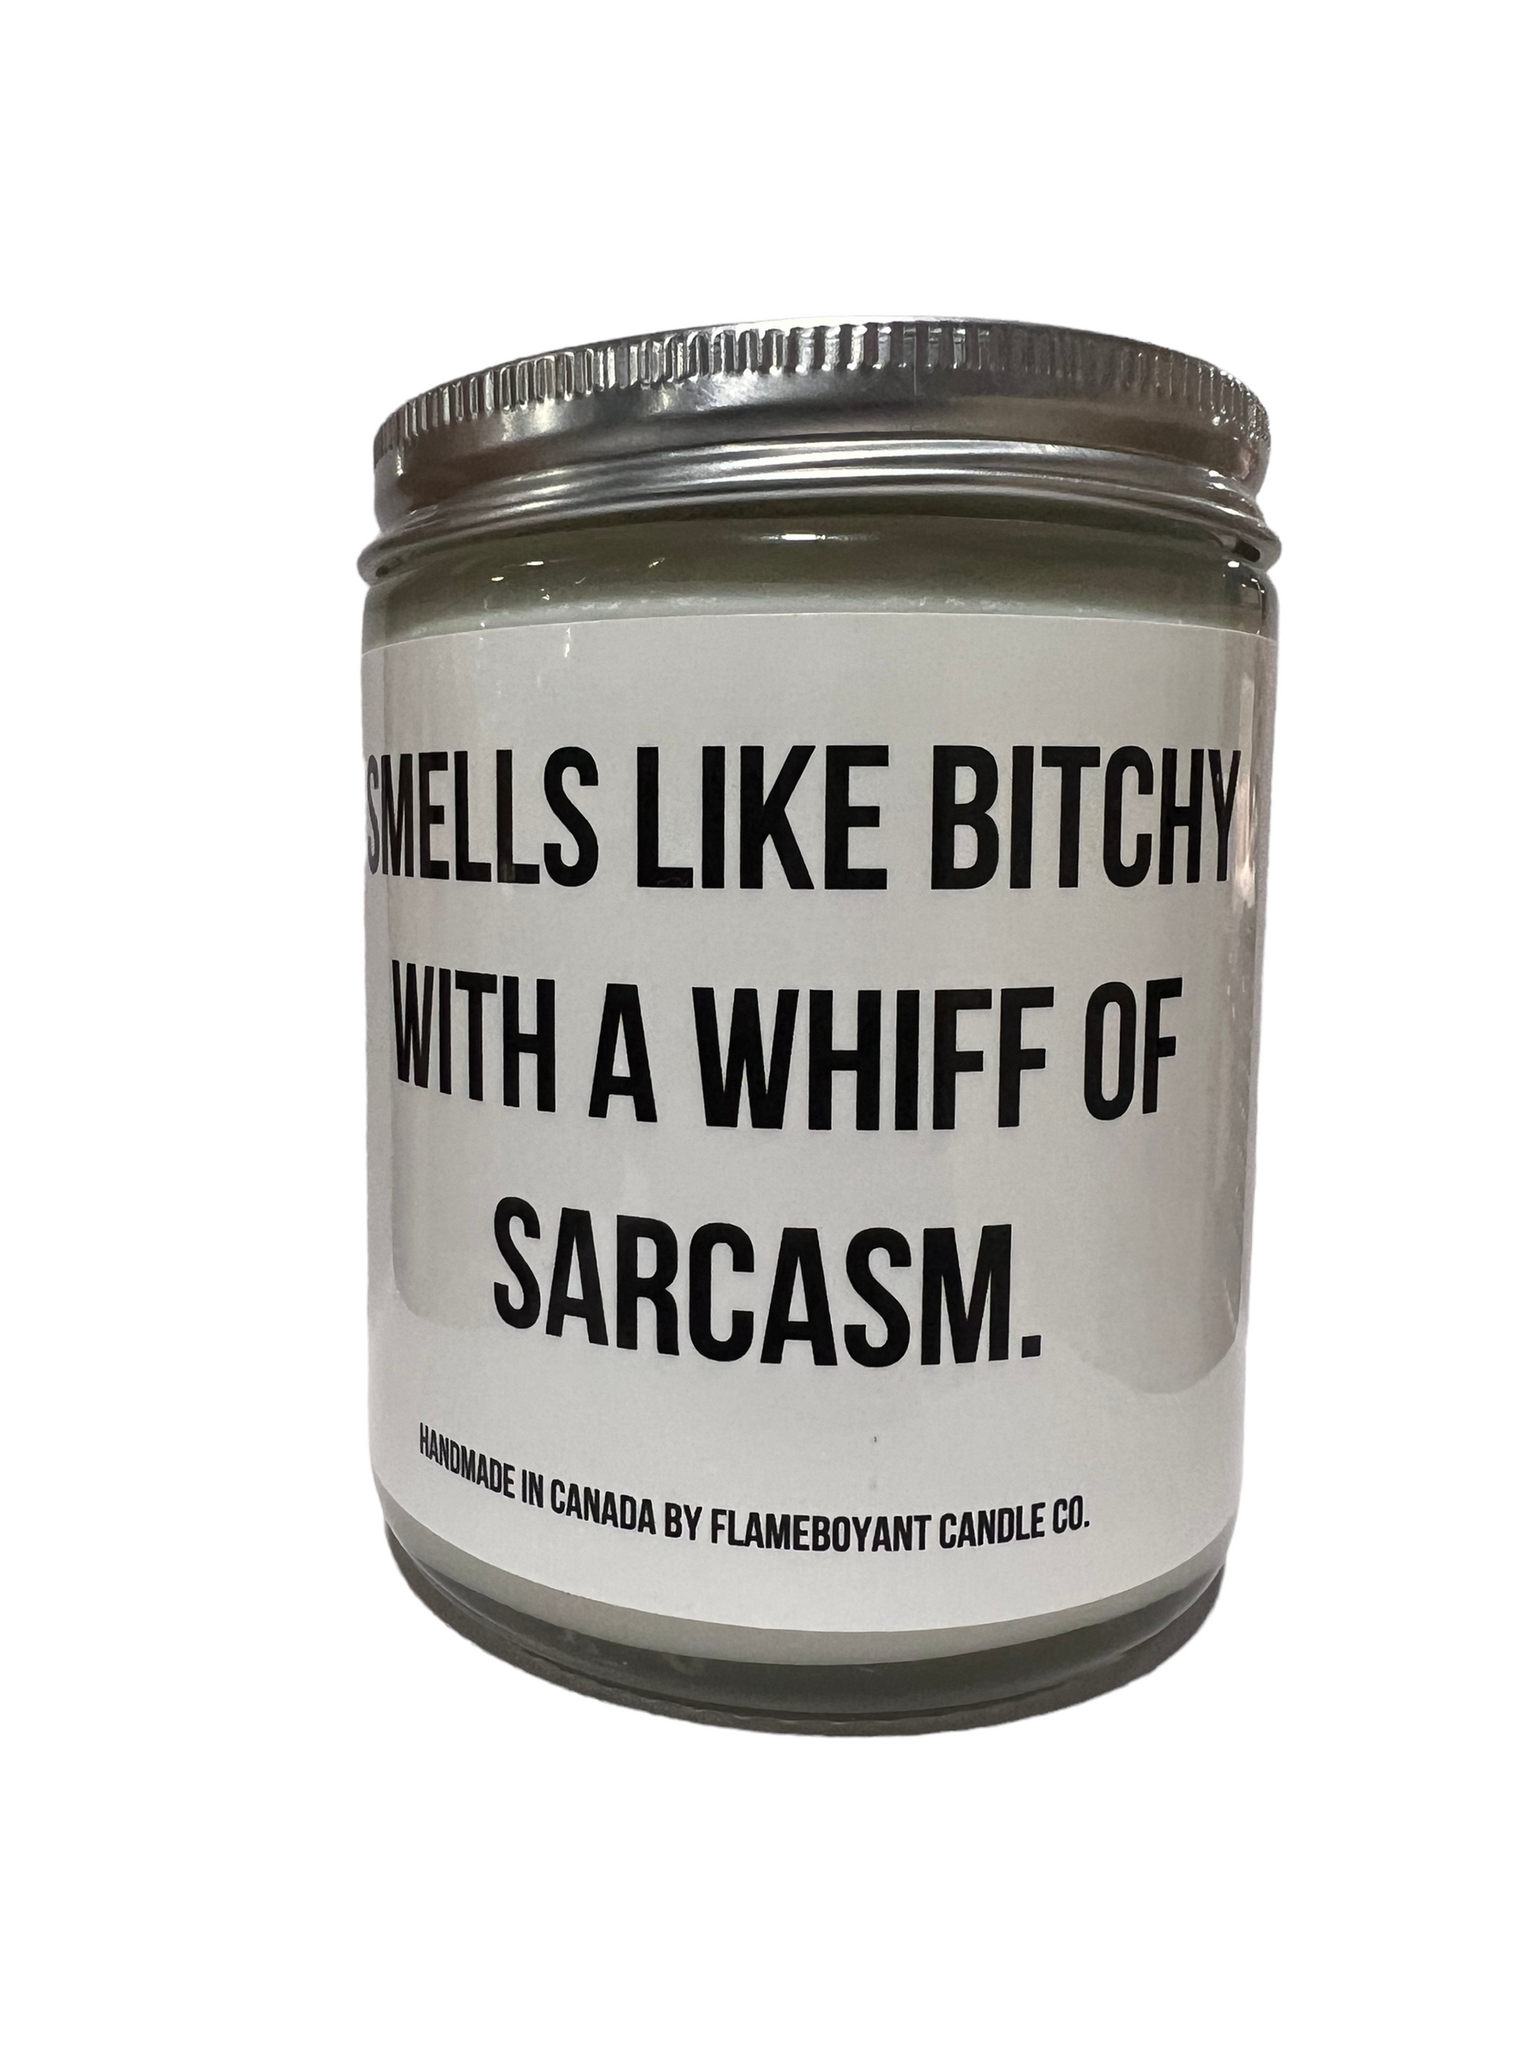 Smells like bitchy with a whiff of sarcasm